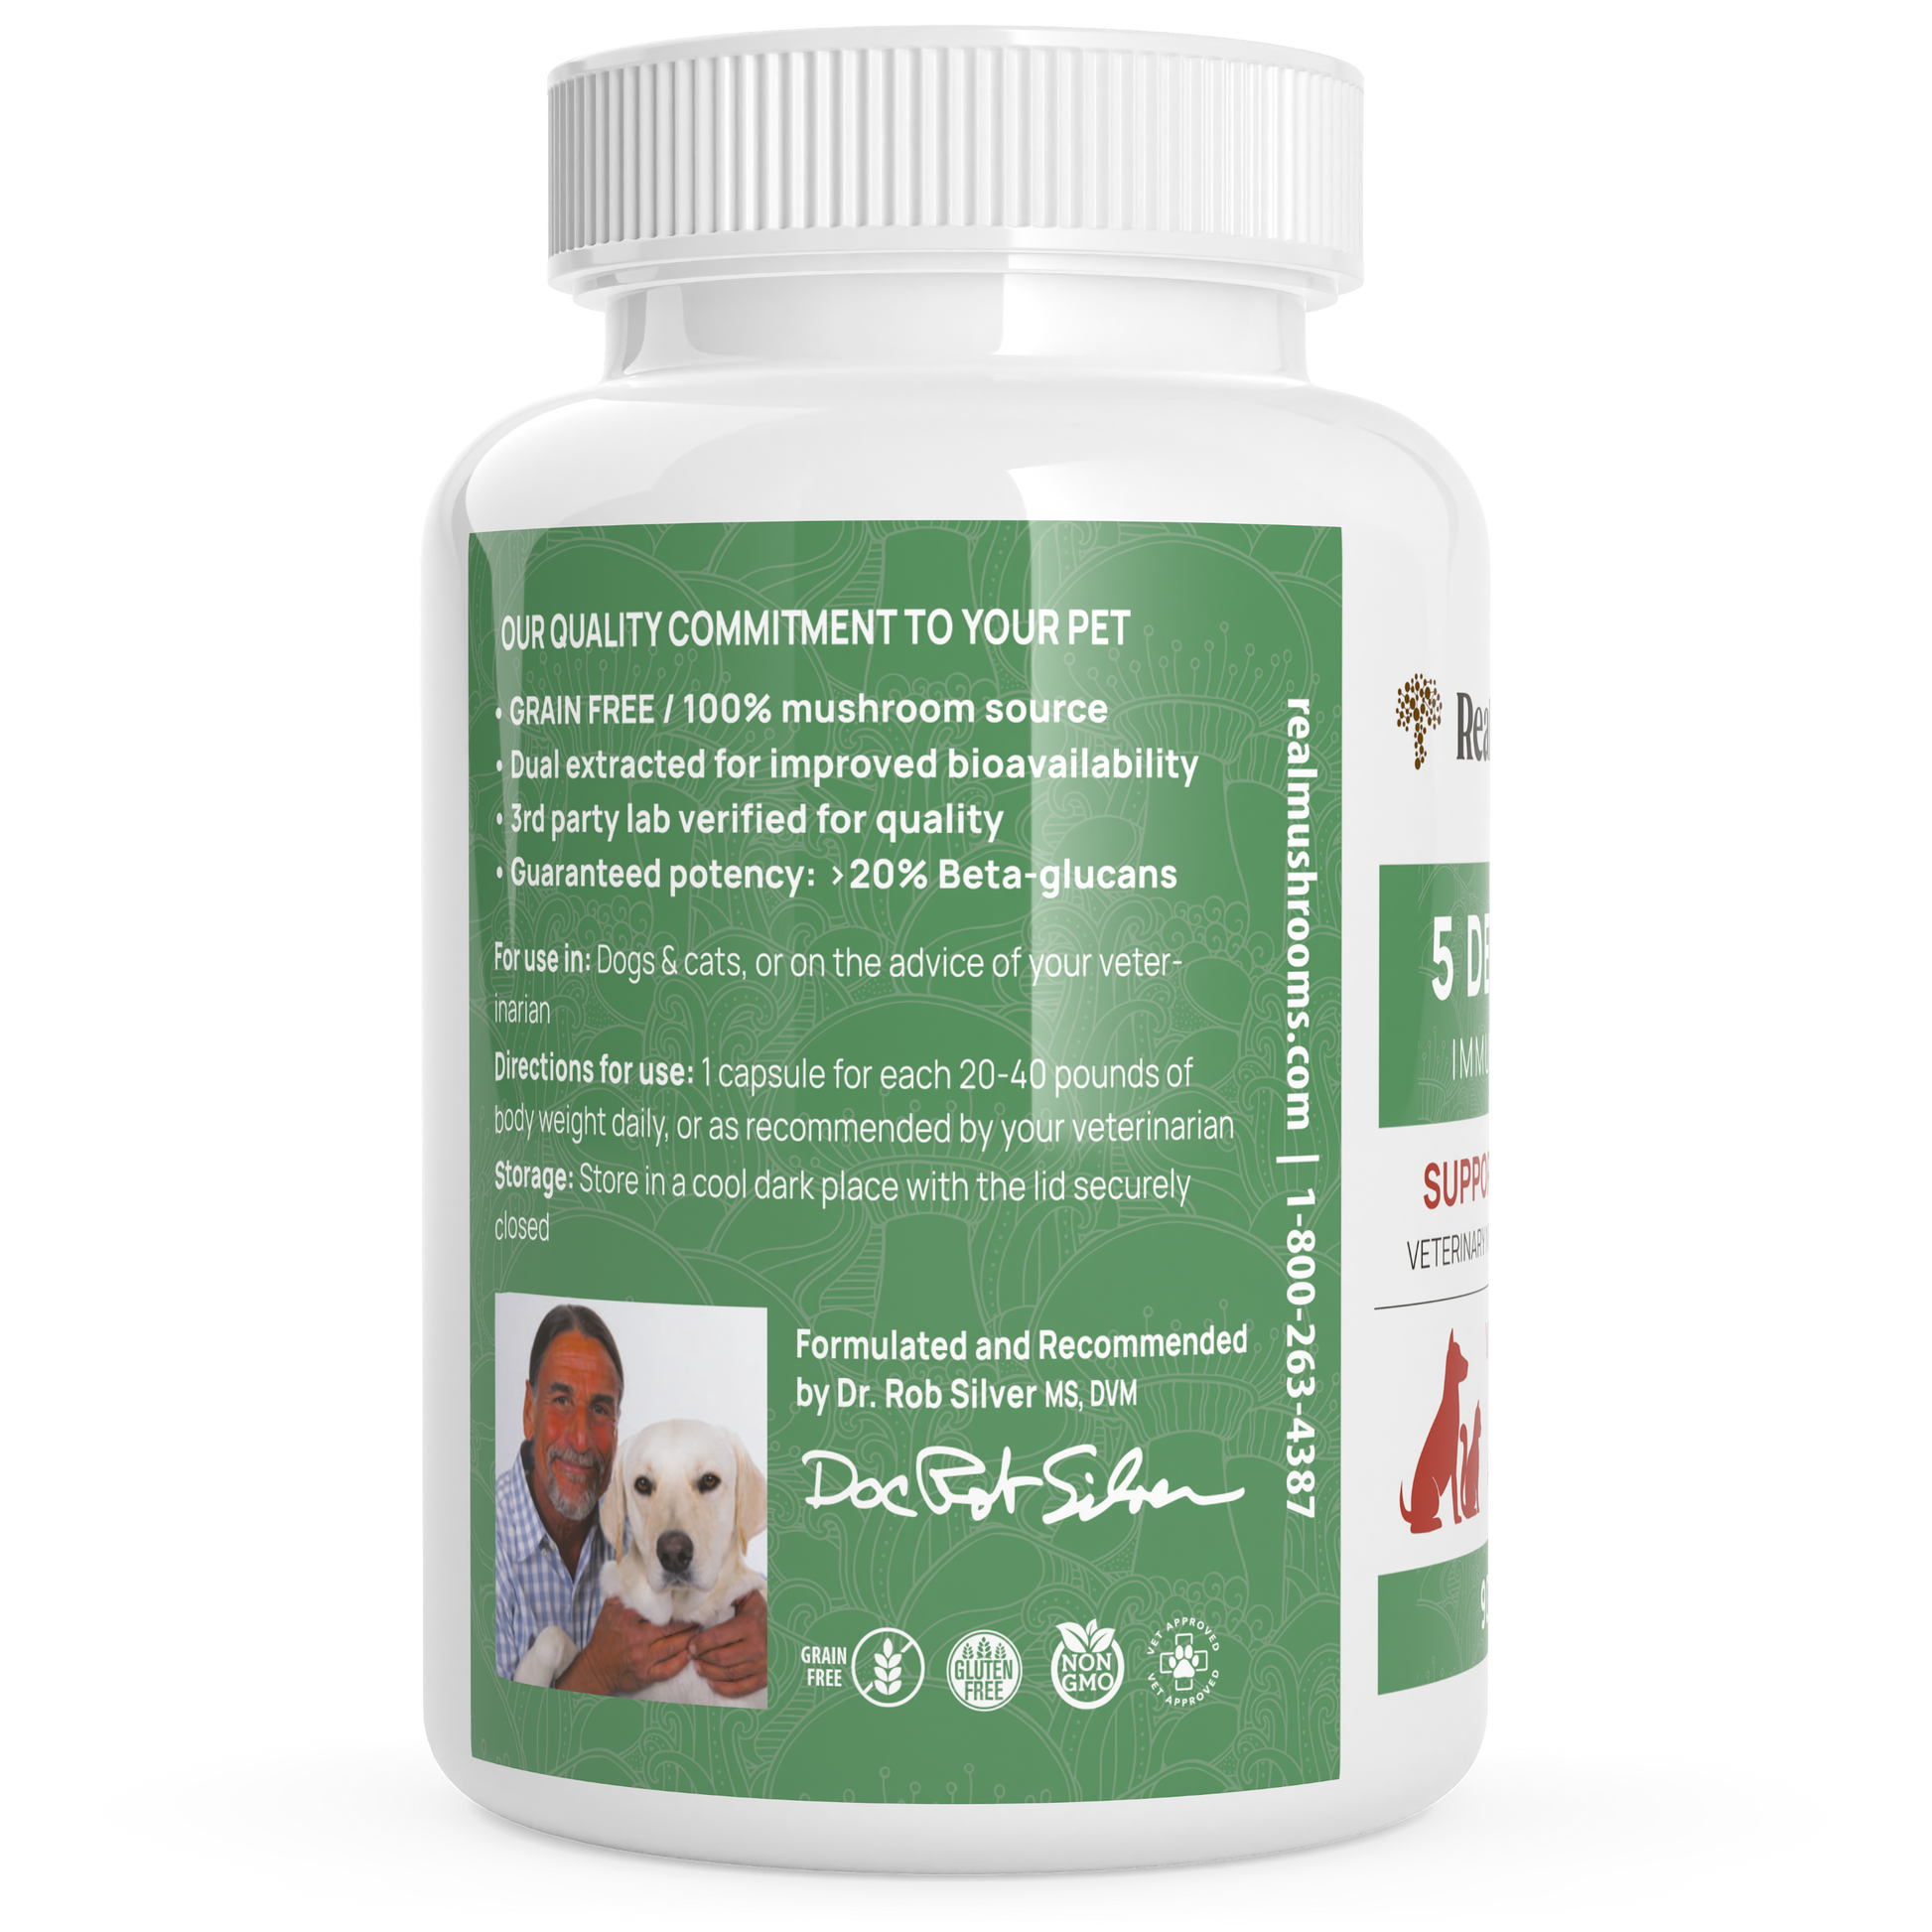 A bottle of Real Mushrooms' 5 Defenders Organic Mushroom Blend Capsules for Pets for dogs.